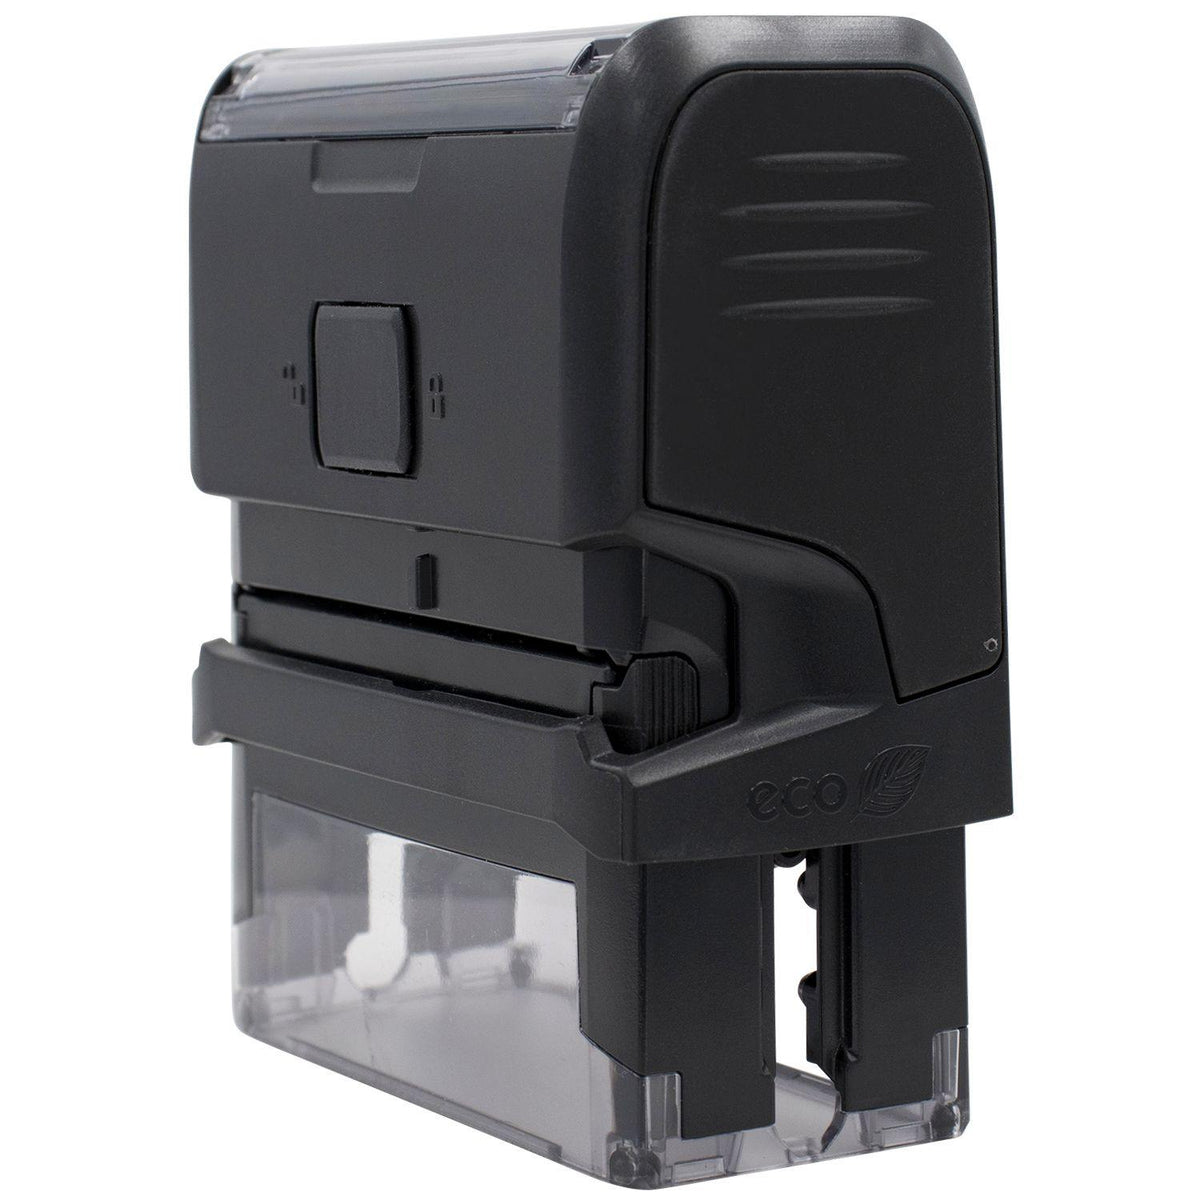 Large Self Inking Outstanding Stamp - Engineer Seal Stamps - Brand_Trodat, Impression Size_Large, Stamp Type_Self-Inking Stamp, Type of Use_Teacher